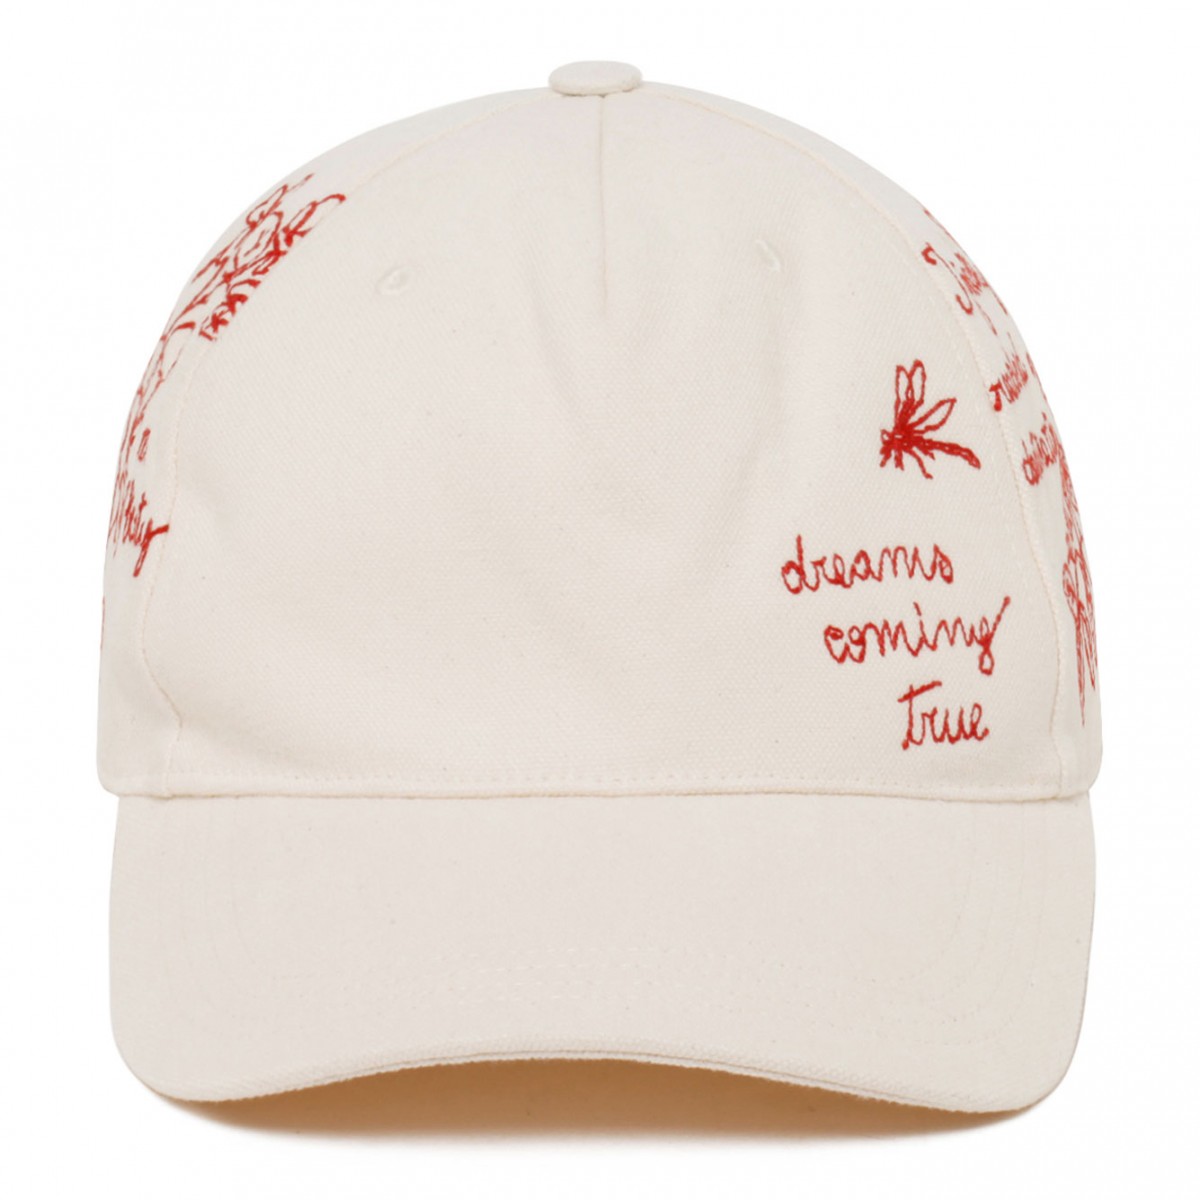 Heritage White and Red Dreams Baseball Cap